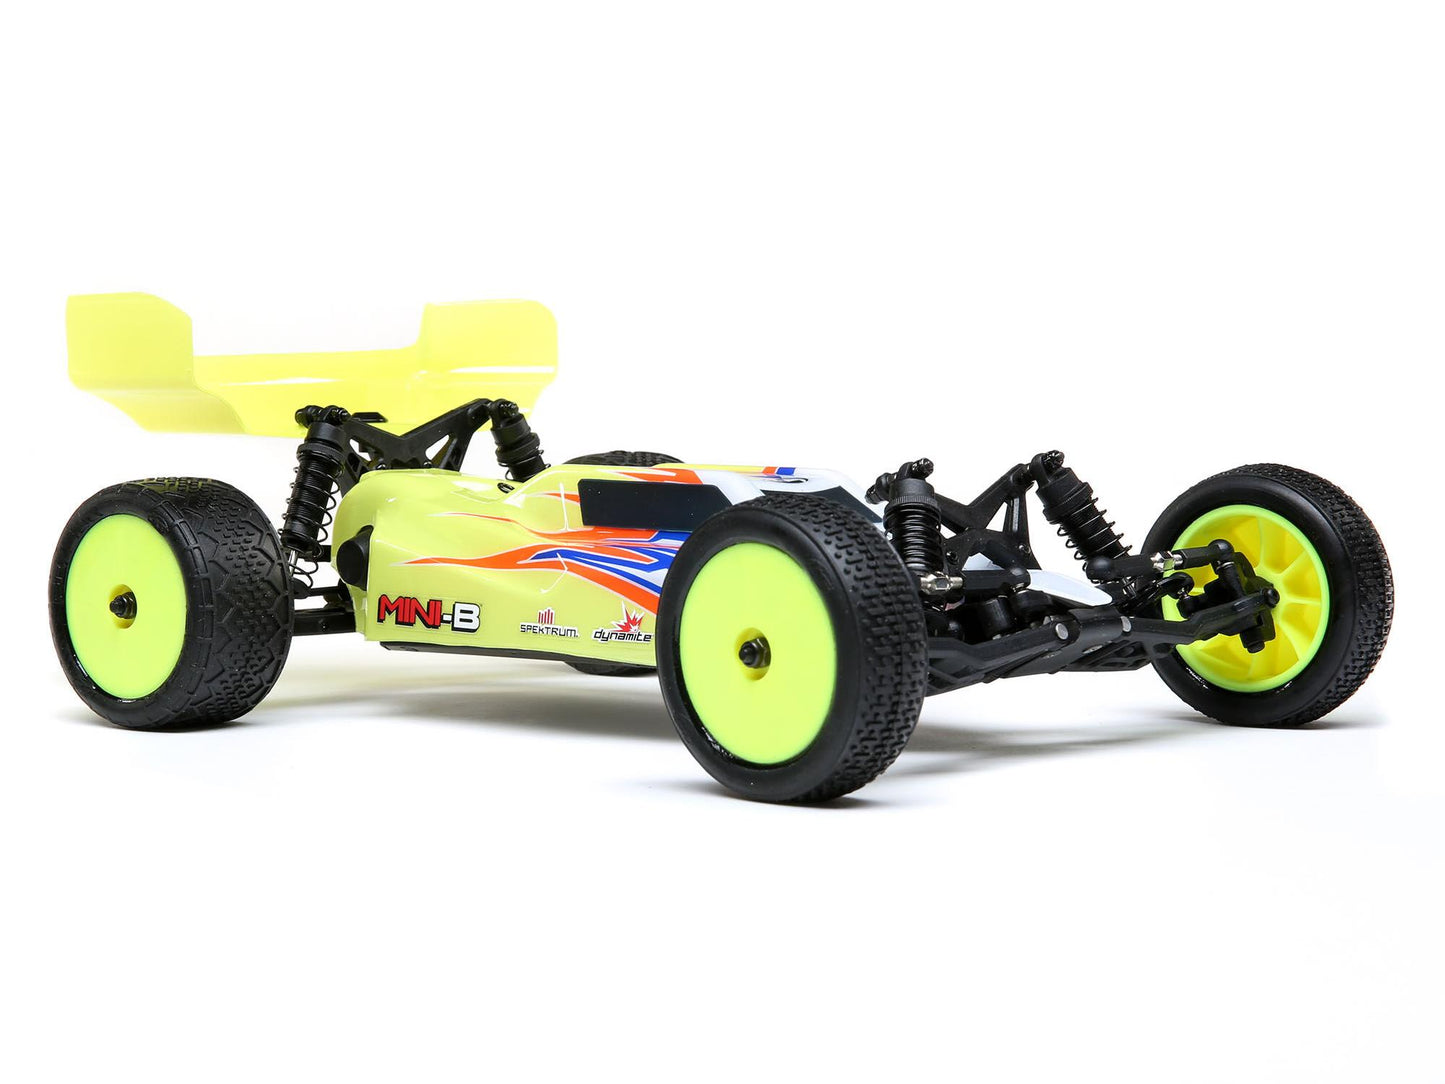 Losi 1/16 Mini-B Brushed RTR 2WD Buggy - Blue/White LOS01016T1  yellow/white LOS01016T (shadow stock)